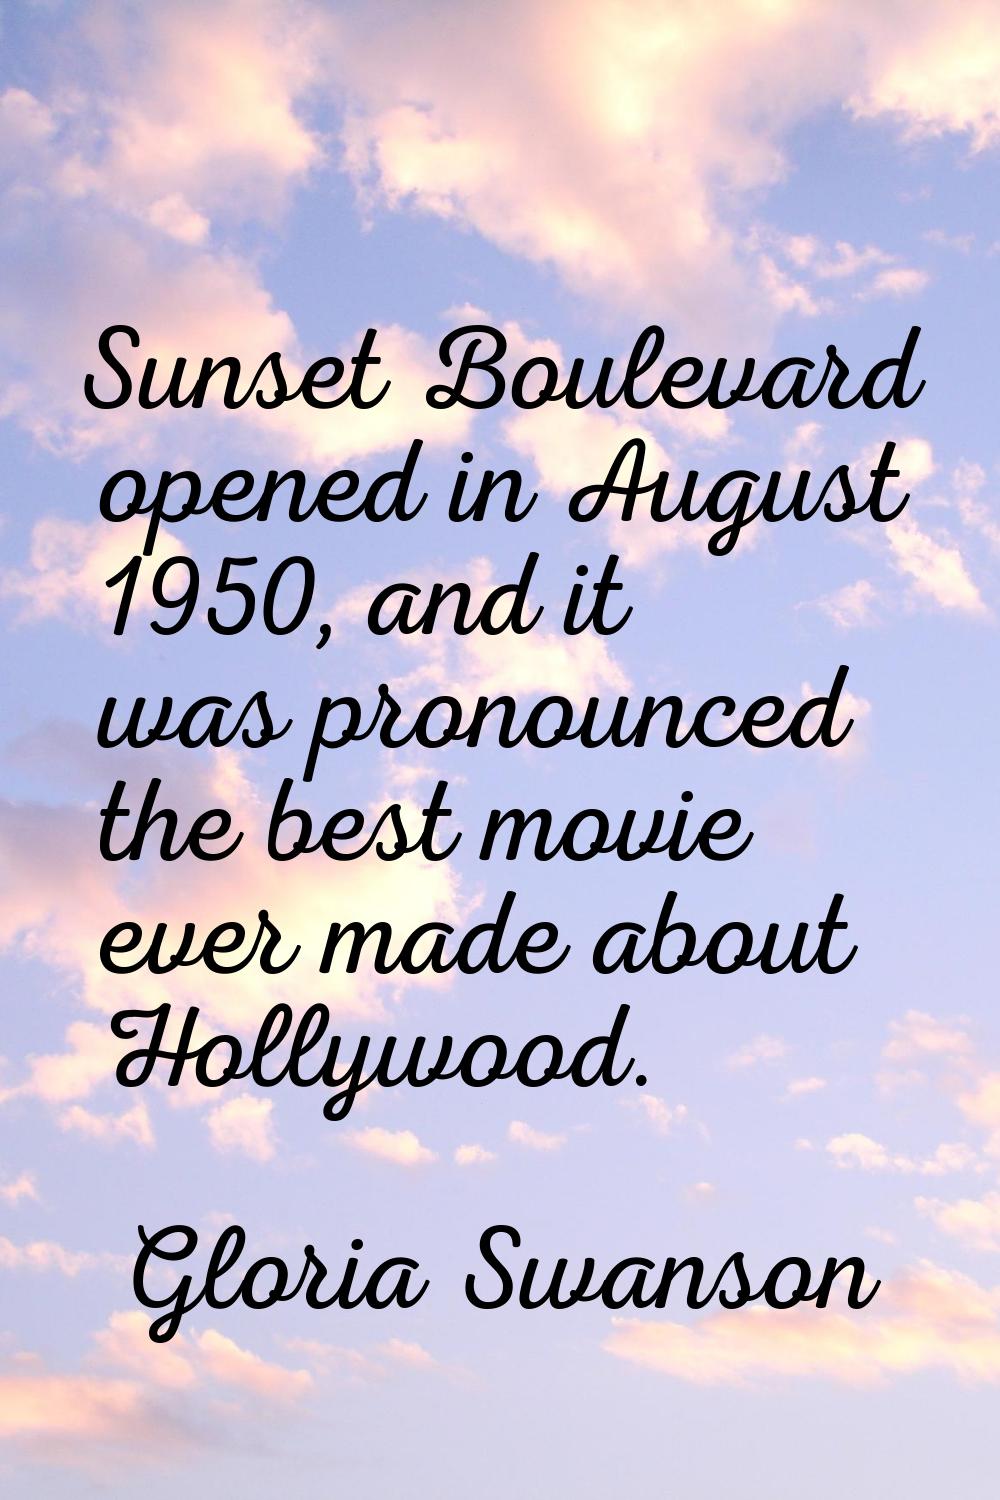 Sunset Boulevard opened in August 1950, and it was pronounced the best movie ever made about Hollyw